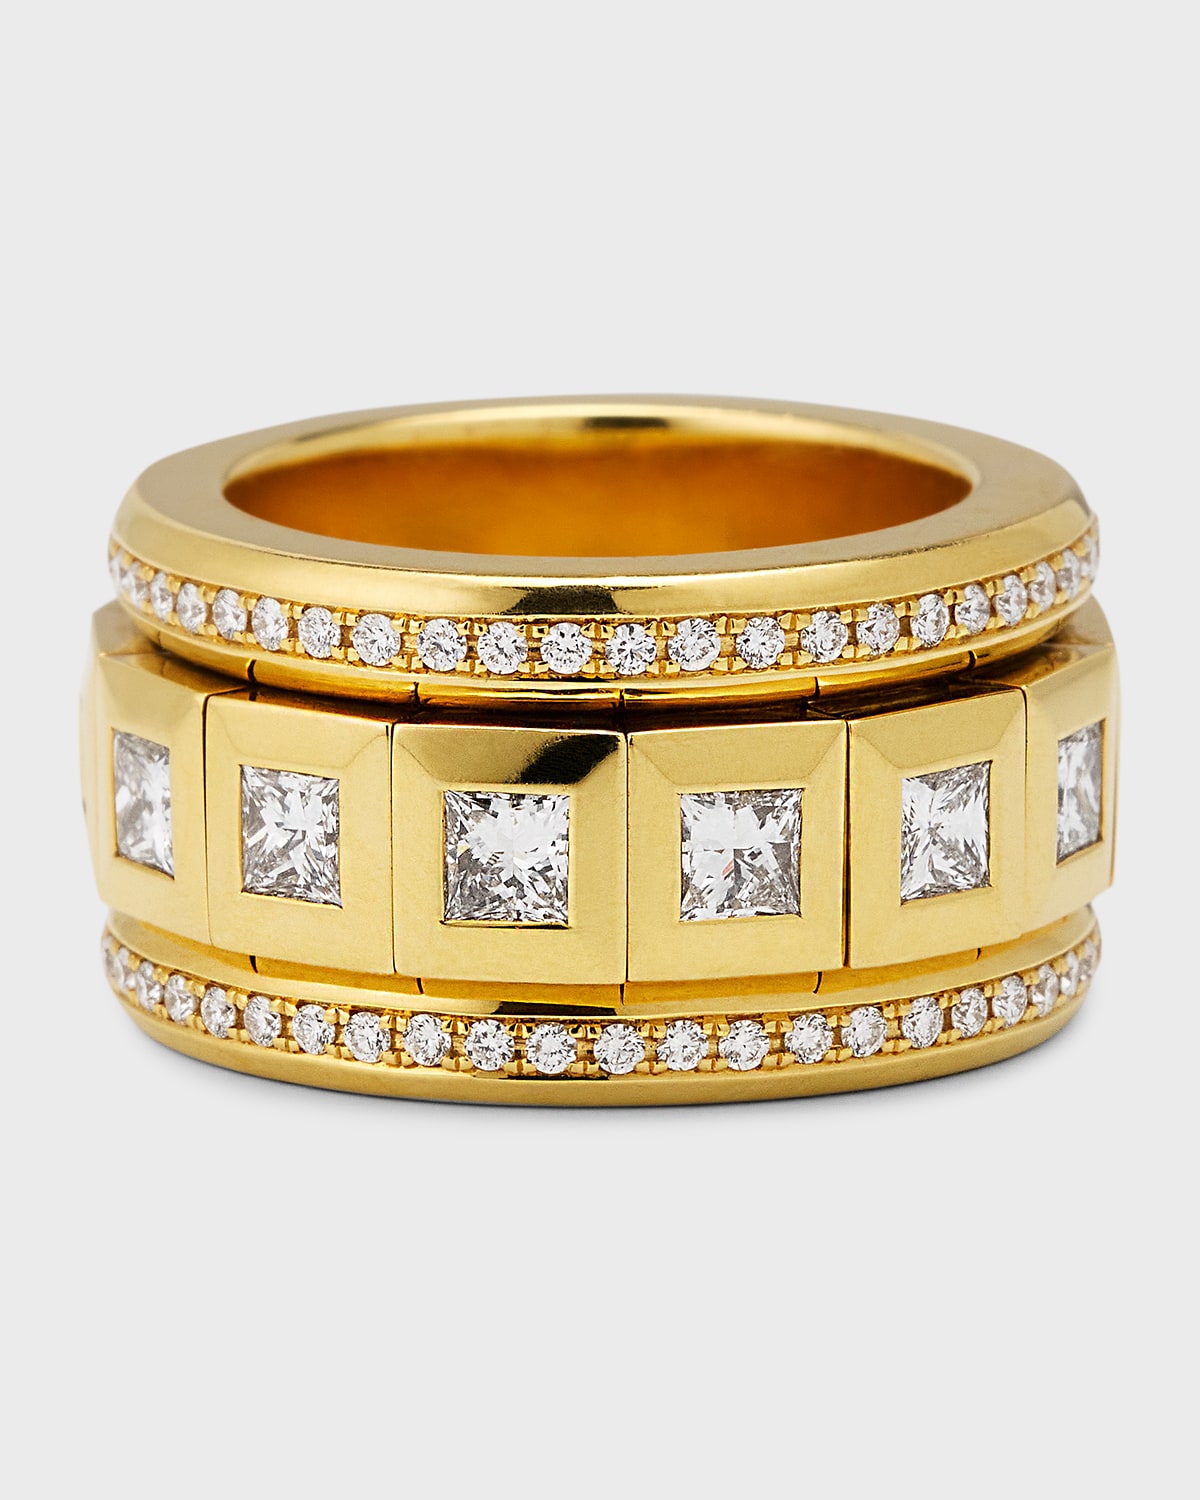 Curriculum Vitae 18k Yellow Gold Pave Ring, Size 8.5